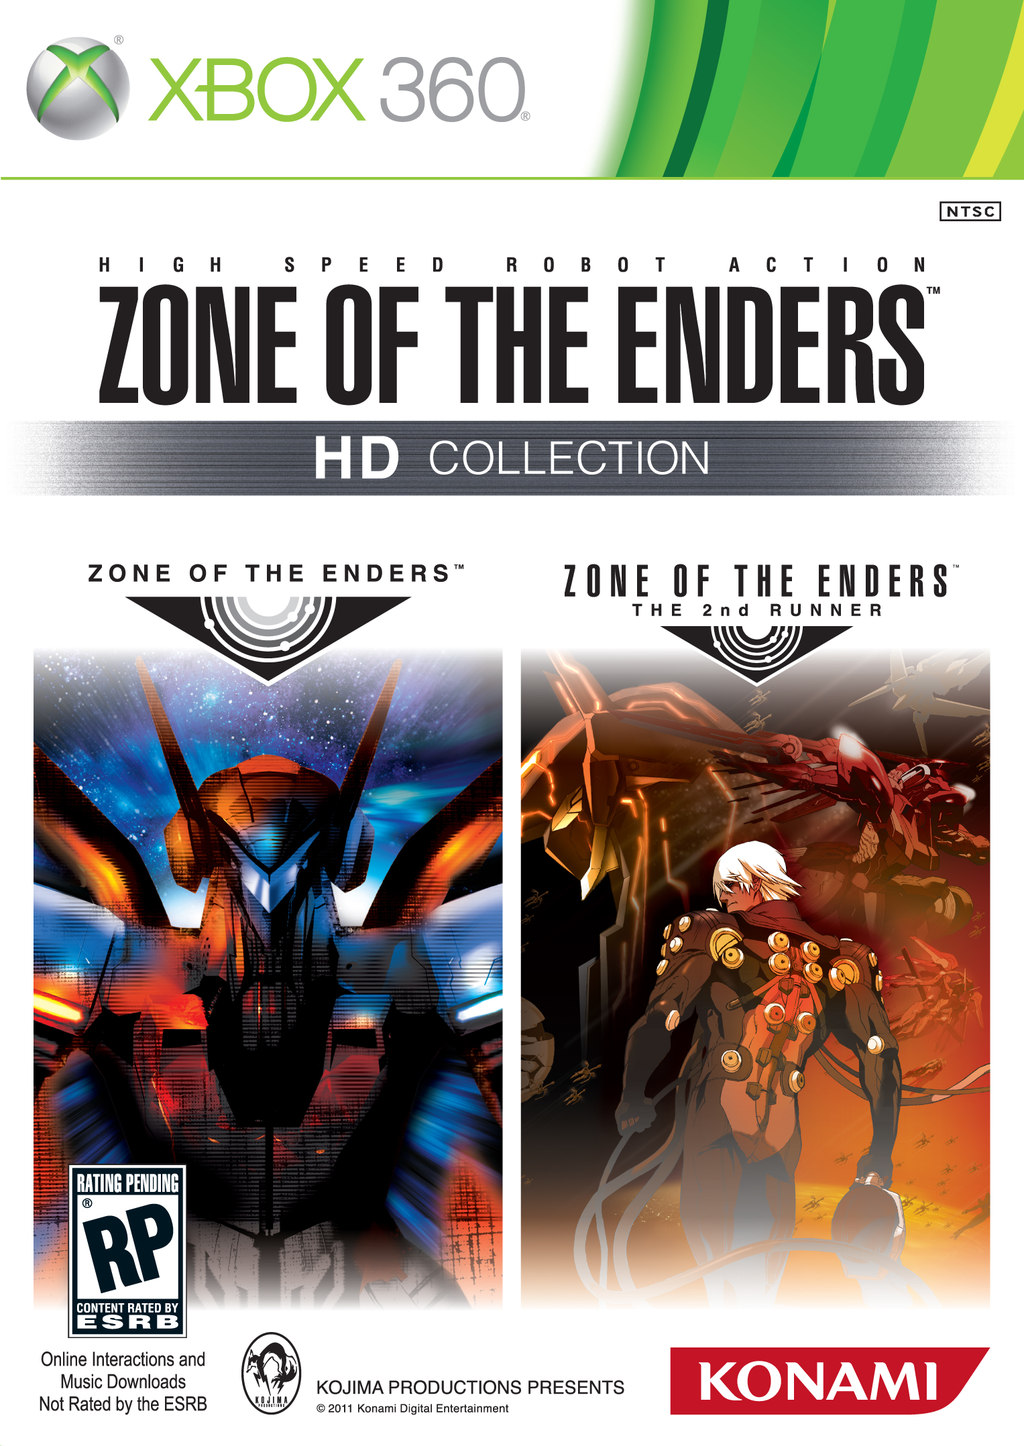 Zone of the Enders HD Collection arriva in autunno